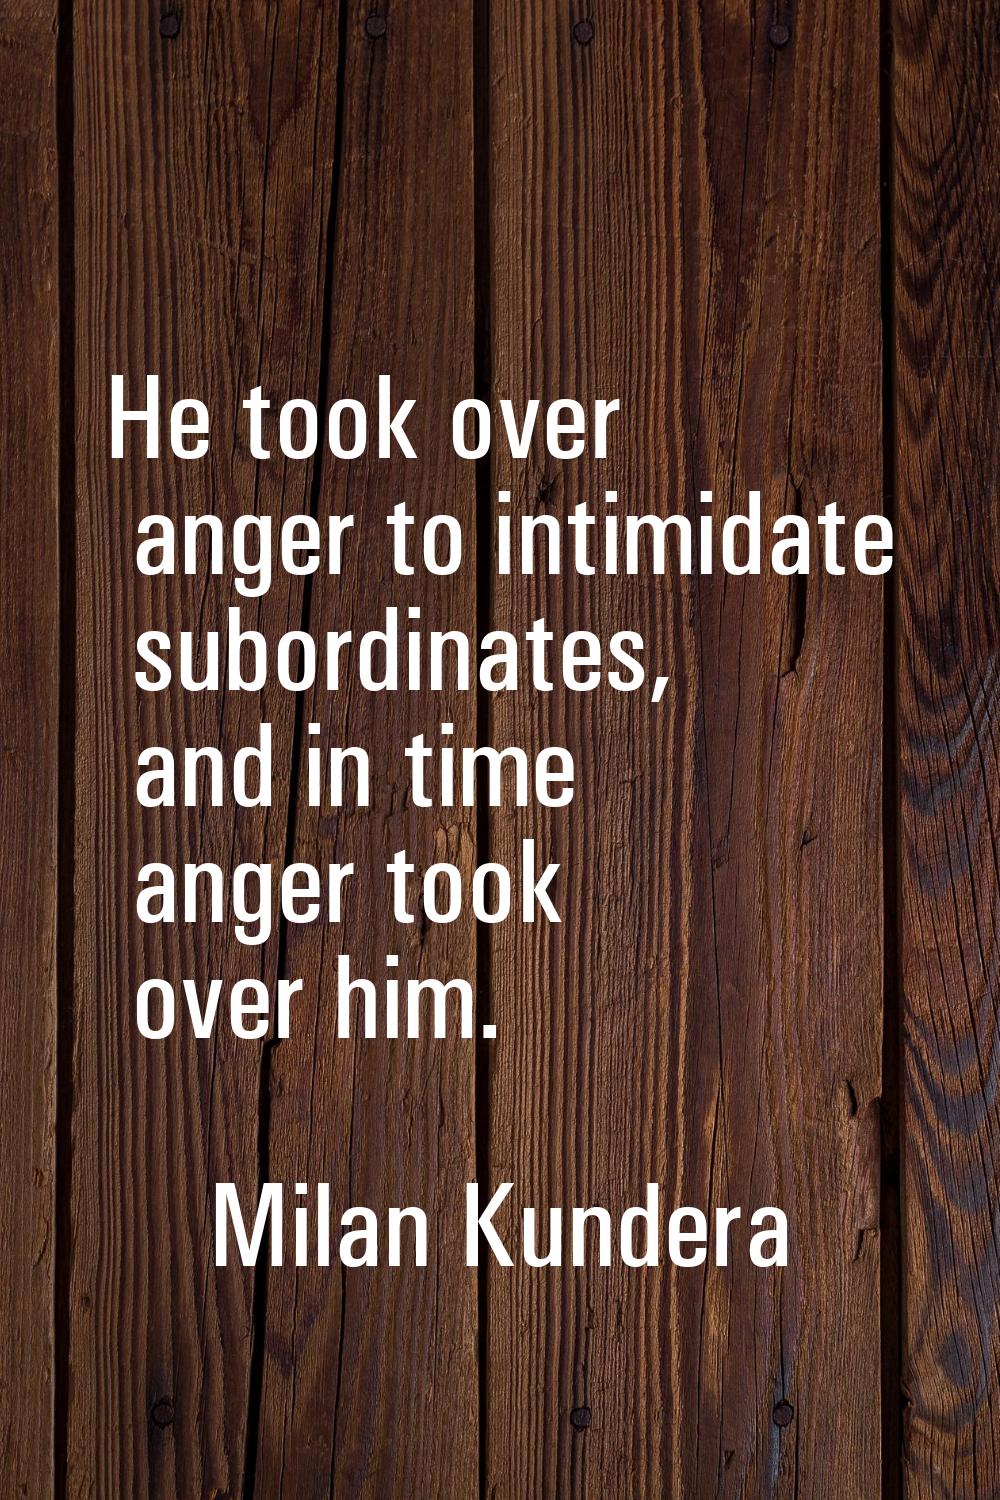 He took over anger to intimidate subordinates, and in time anger took over him.